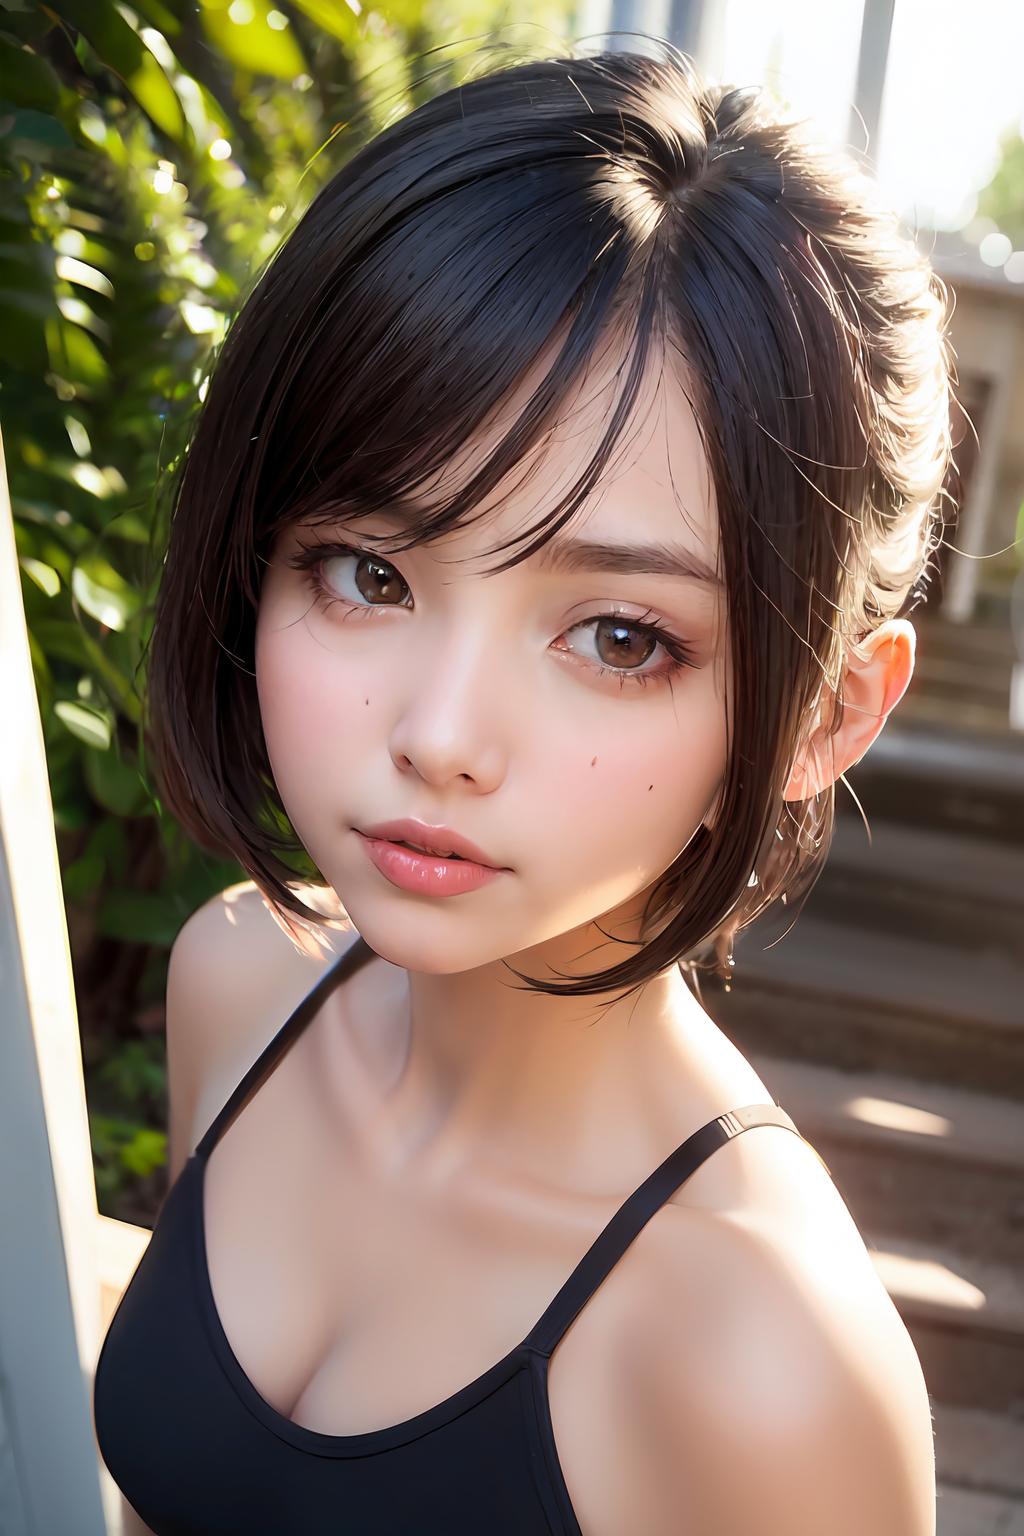 A young girl with short, dark hair, wearing a black top, and looking to the side.